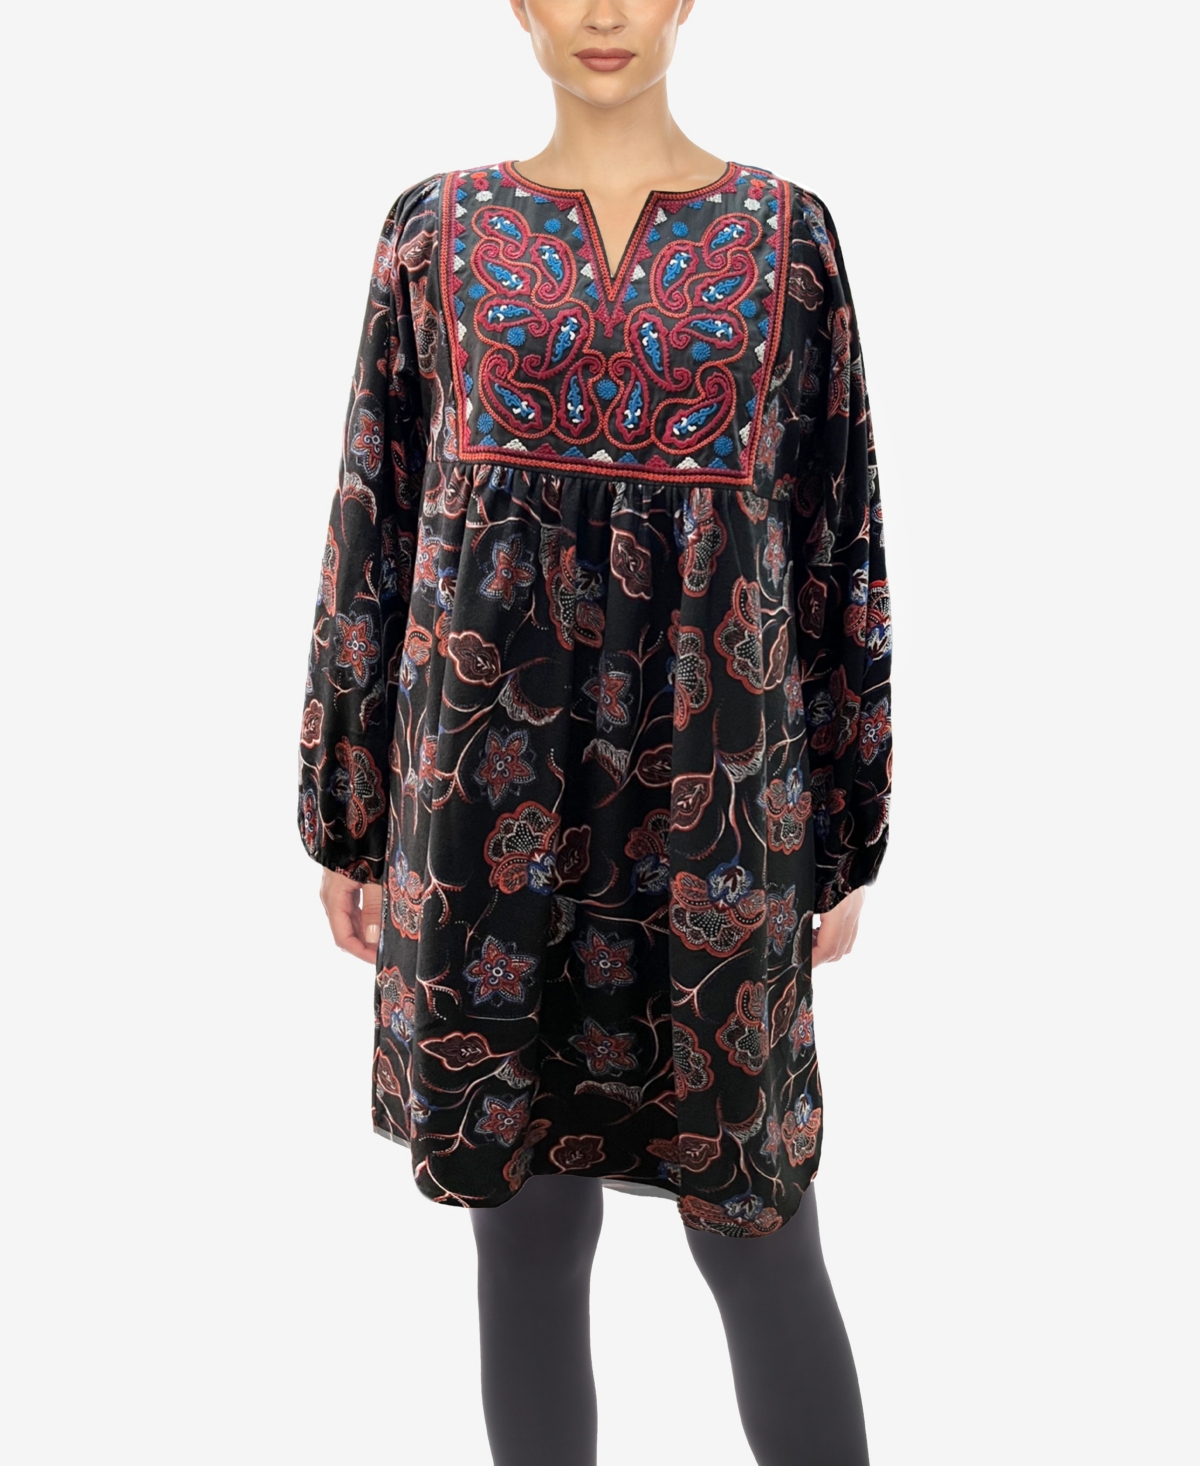 Women's Paisley Flower Embroidered Sweater Dress - Black